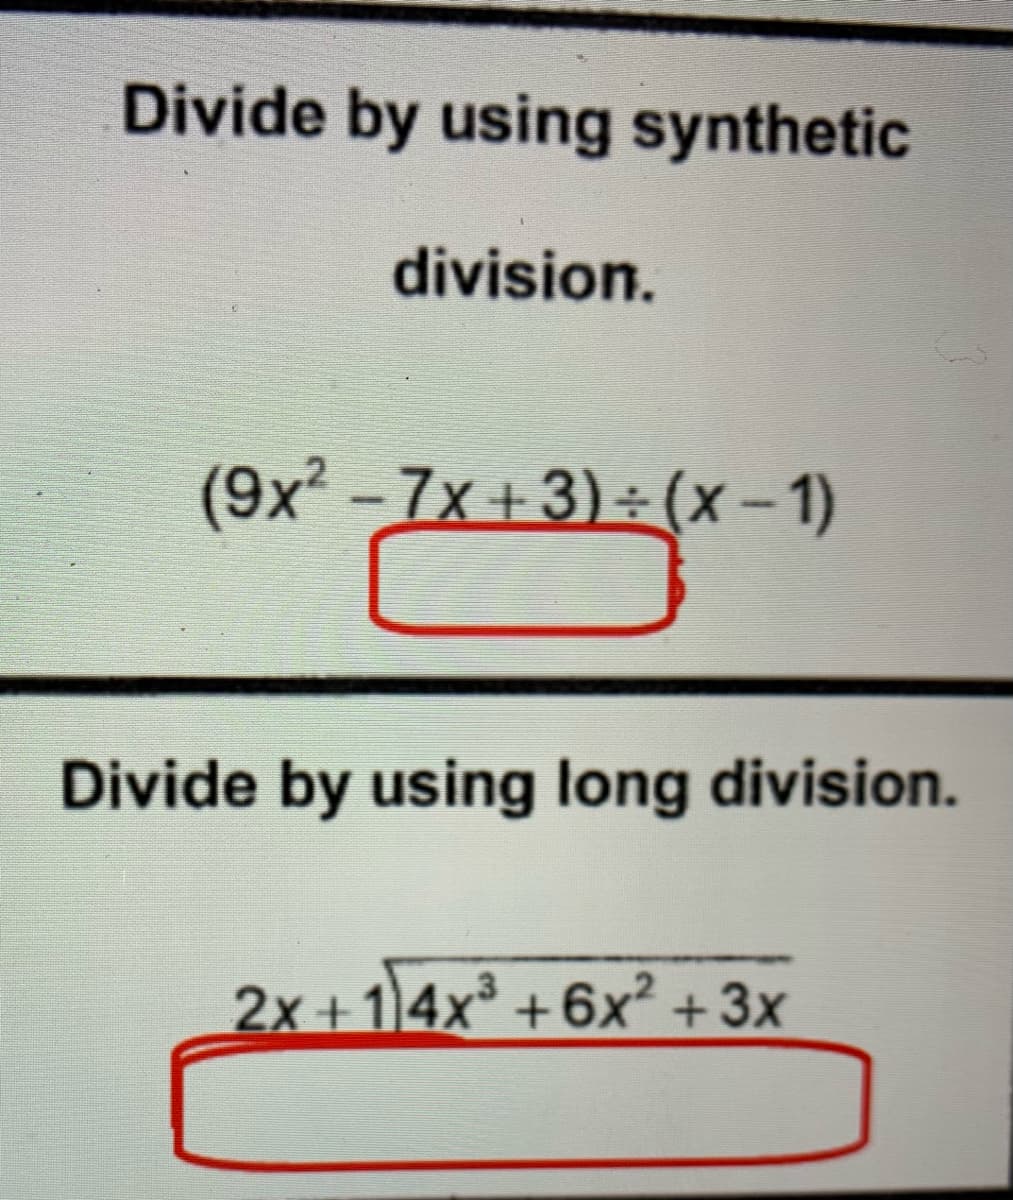 Divide by using synthetic
division.
(9x² - 7x +3) ÷ (x – 1)
Divide by using long division.
2x +14x³ +6x² +3x
